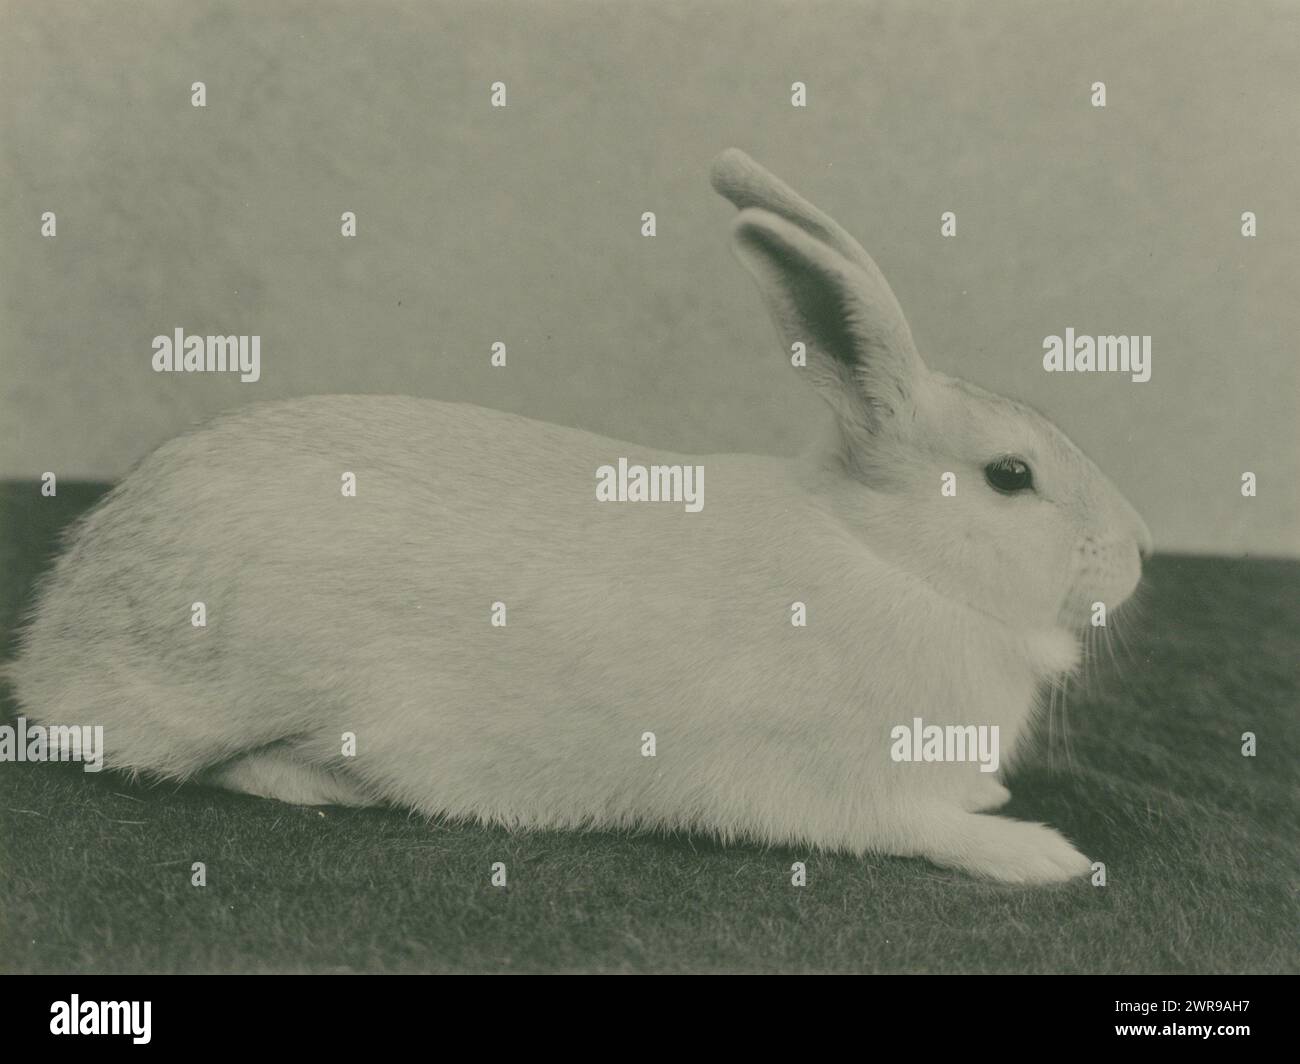 Animal study of a rabbit, Richard Tepe, (attributed to), Netherlands, c. 1900 - c. 1930, paper, gelatin silver print, height 158 mm × width 214 mm, photograph Stock Photo